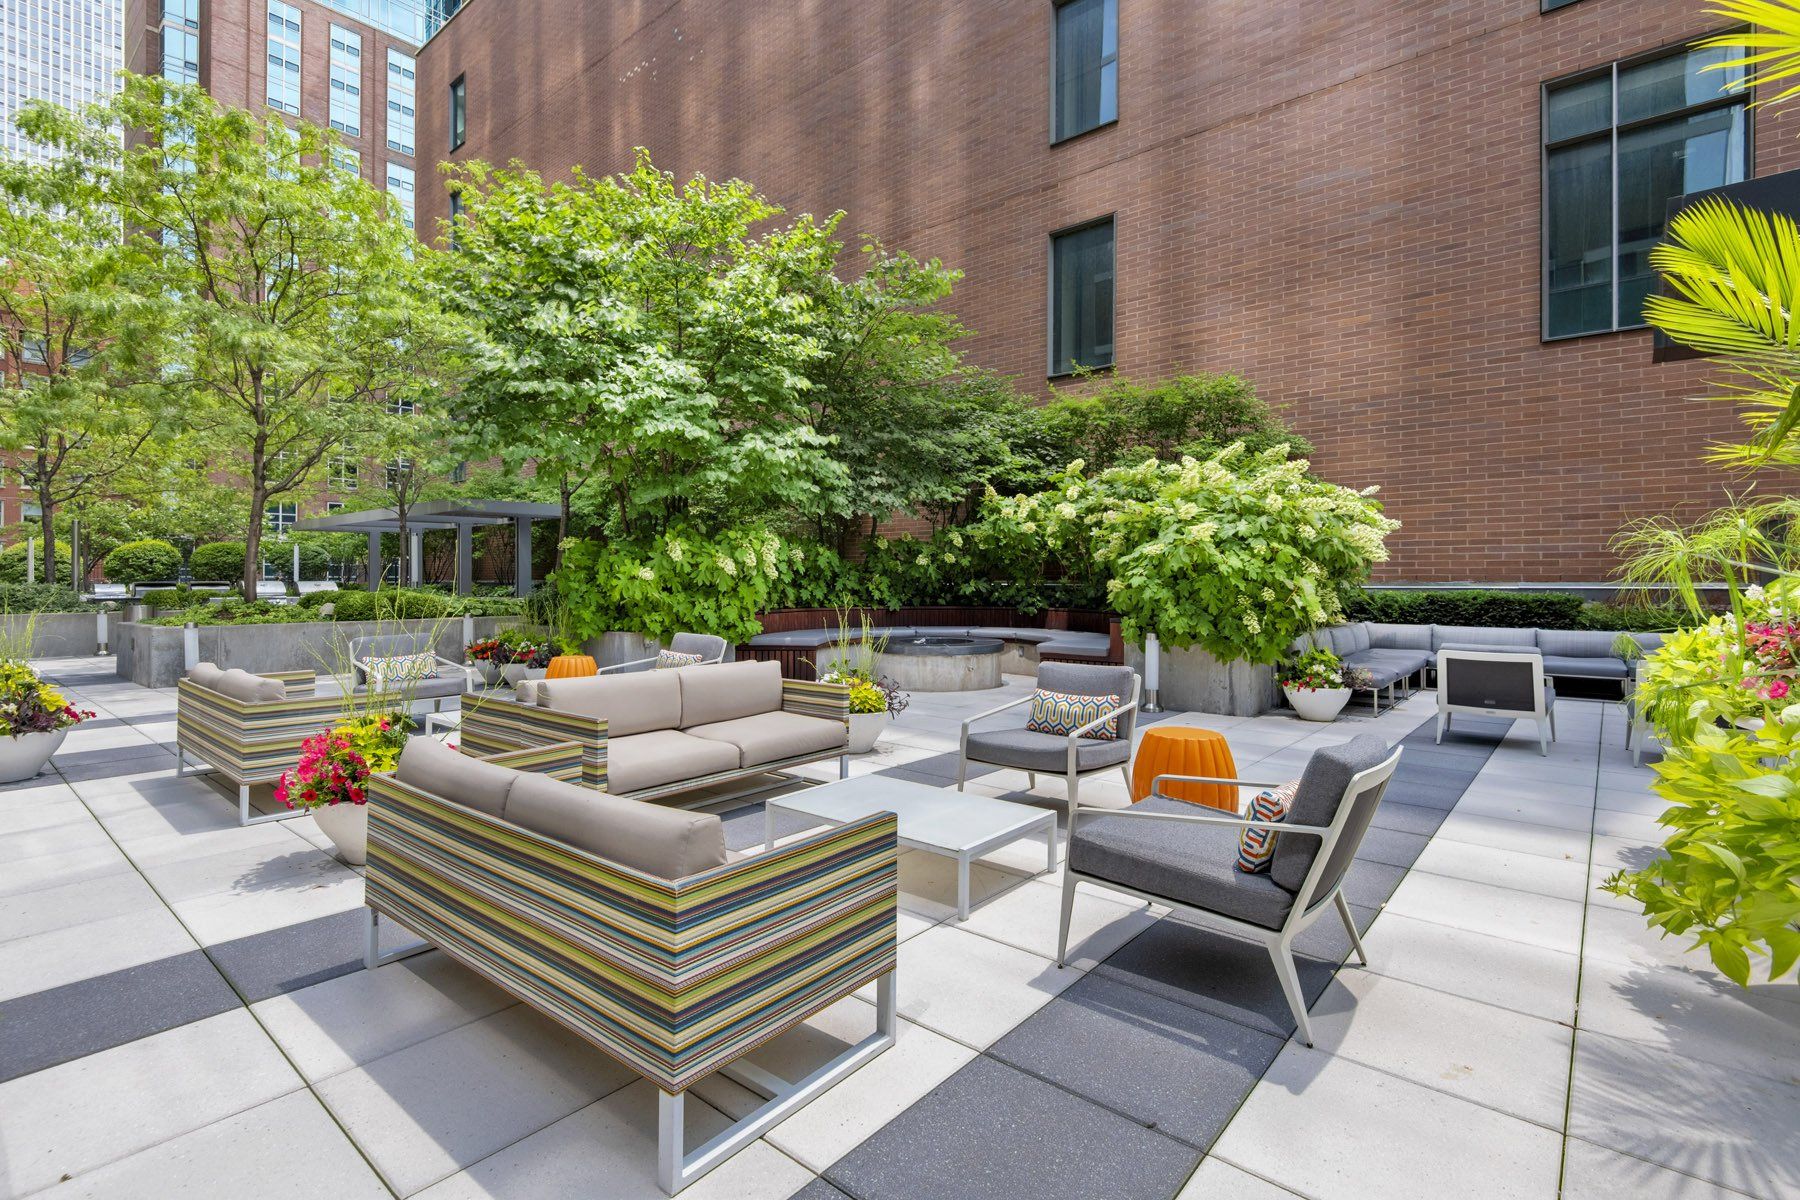 A patio with a lot of furniture and trees in front of a brick building at State & Chestnut.